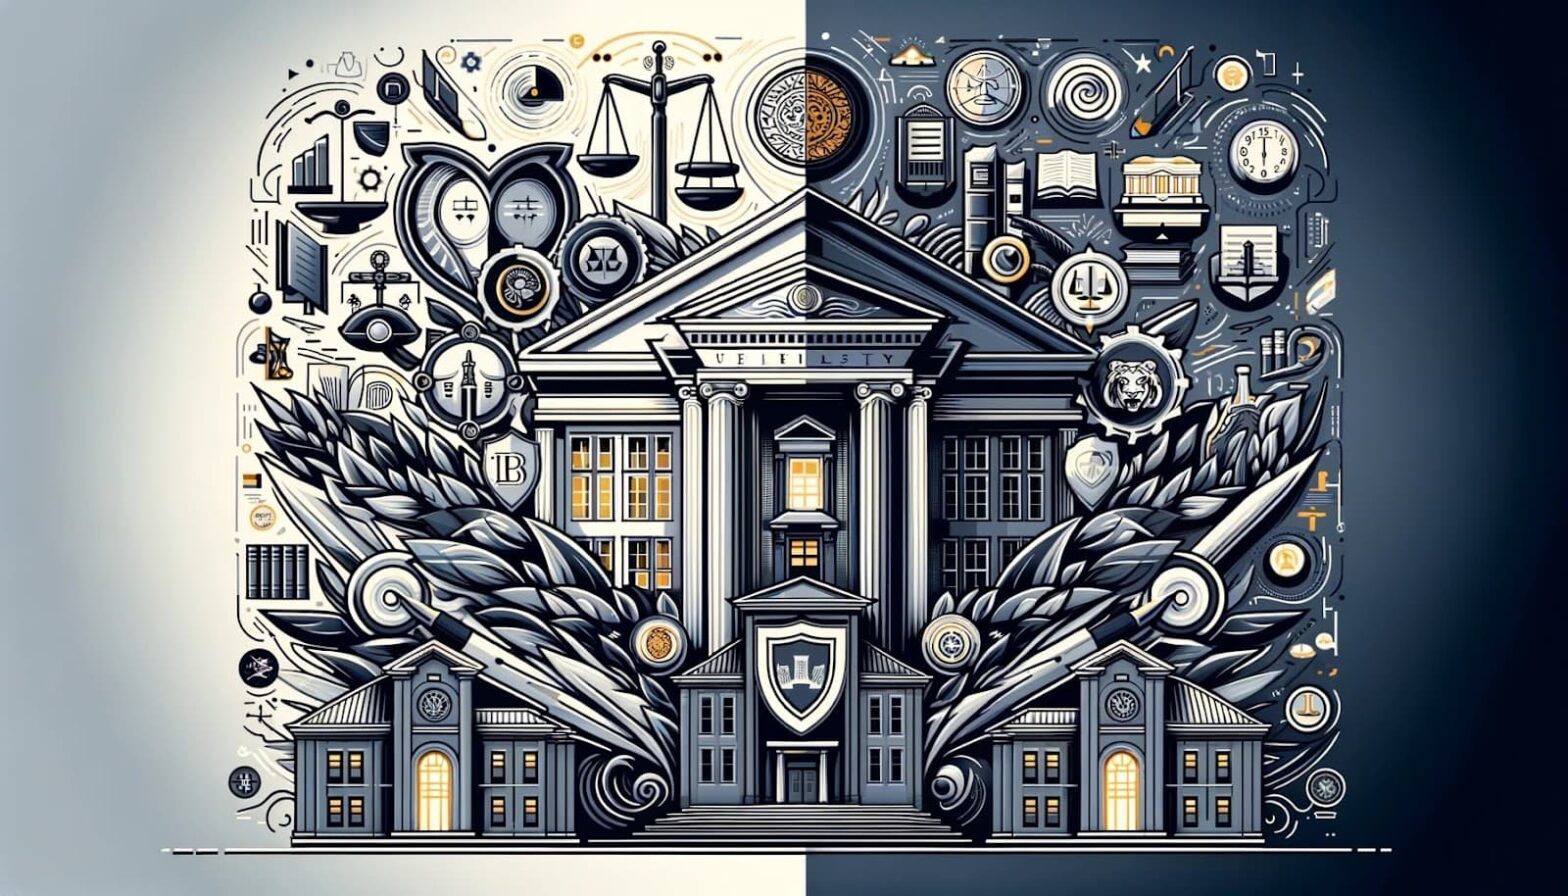 University with various elements of law